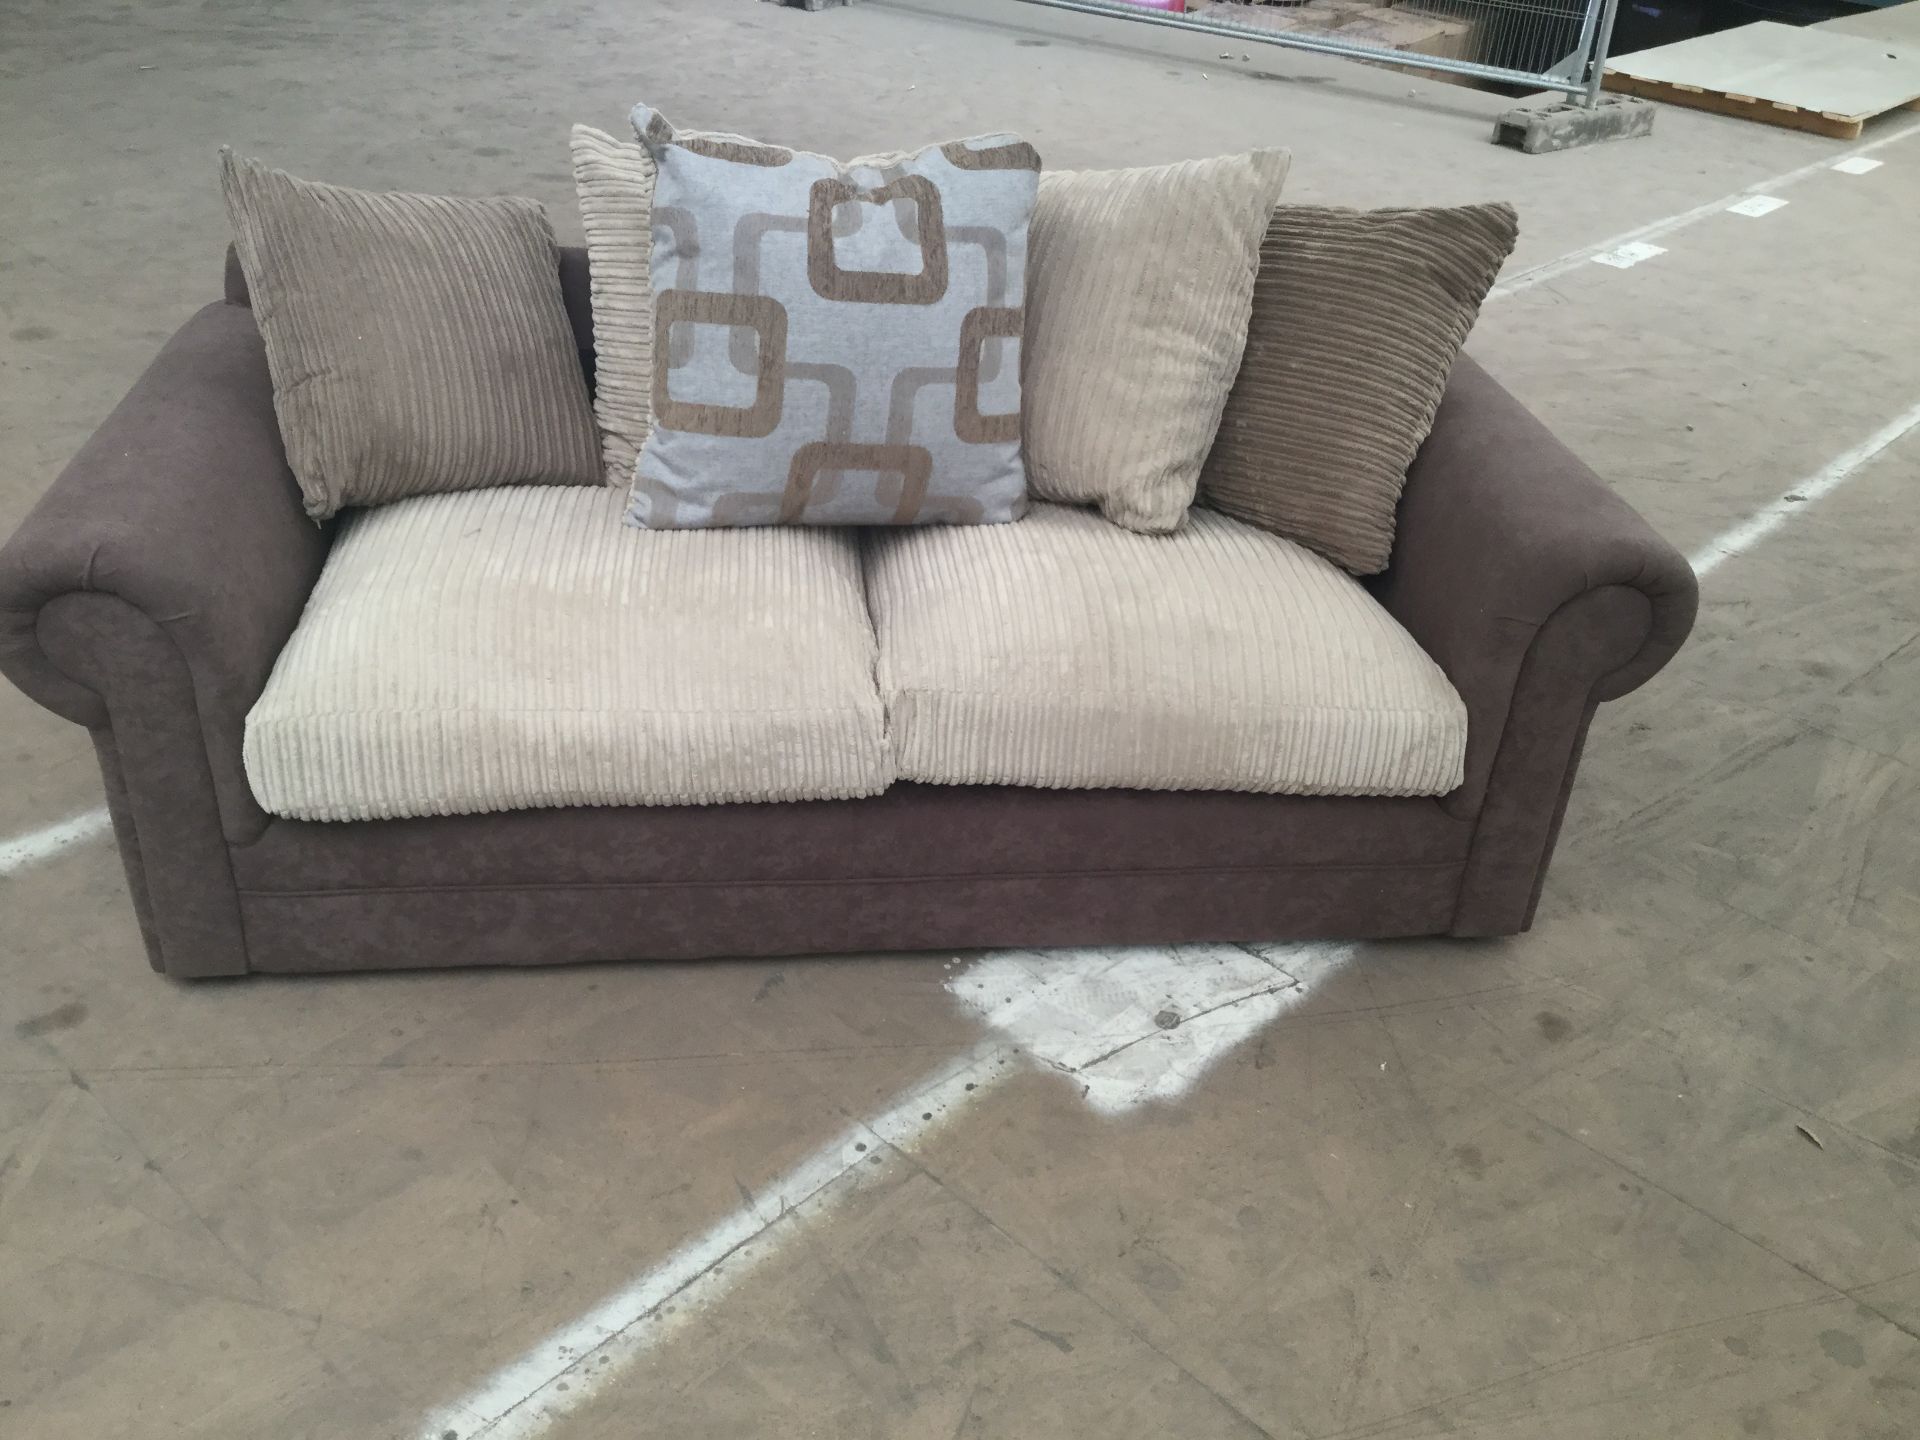 Brand new direct from the manufacturers 3 seater and 2 seater Rebecca sofas designed with a brown